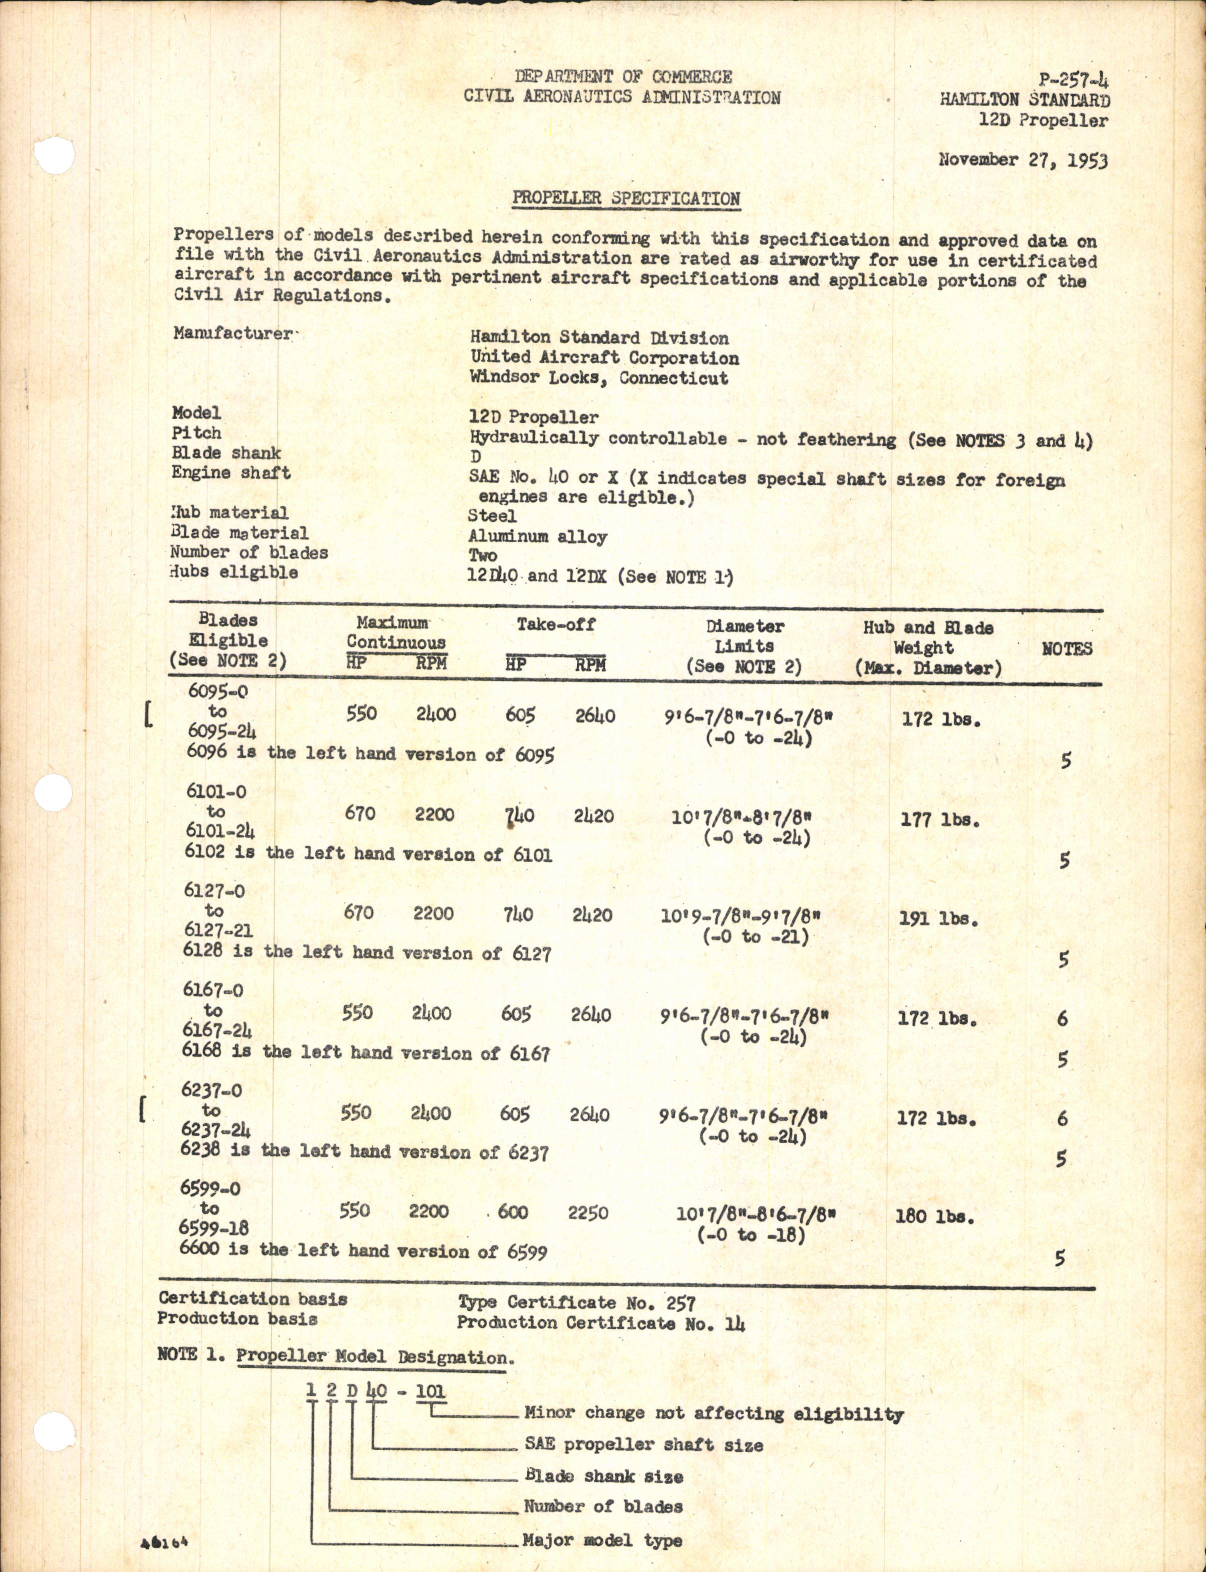 Sample page 1 from AirCorps Library document: Propeller Specification for 12D Propeller